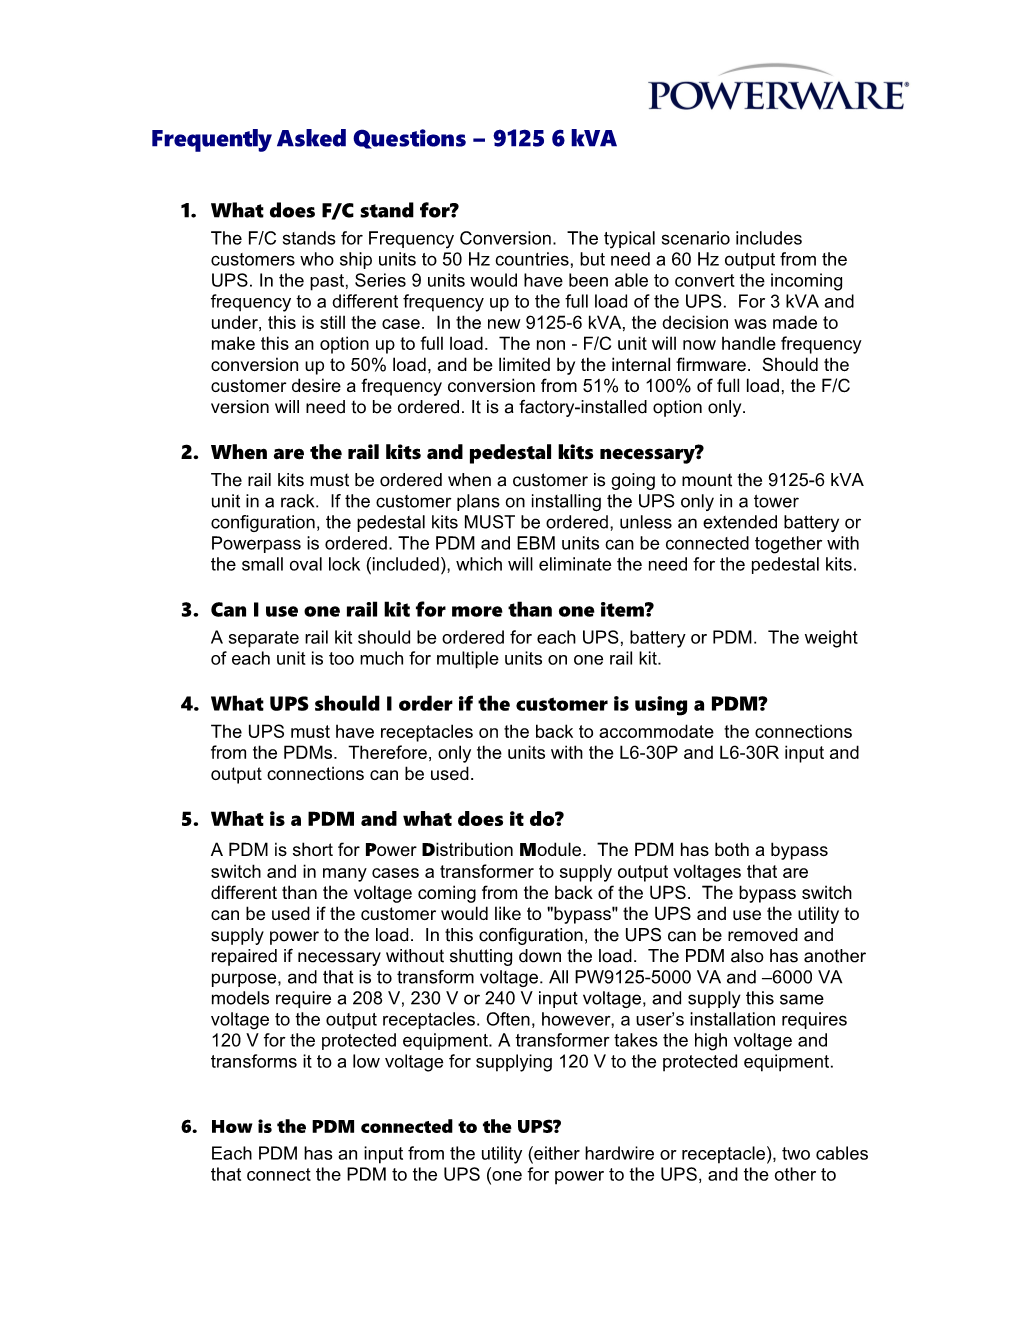 Frequently Asked Questions - 9125- 6Kva